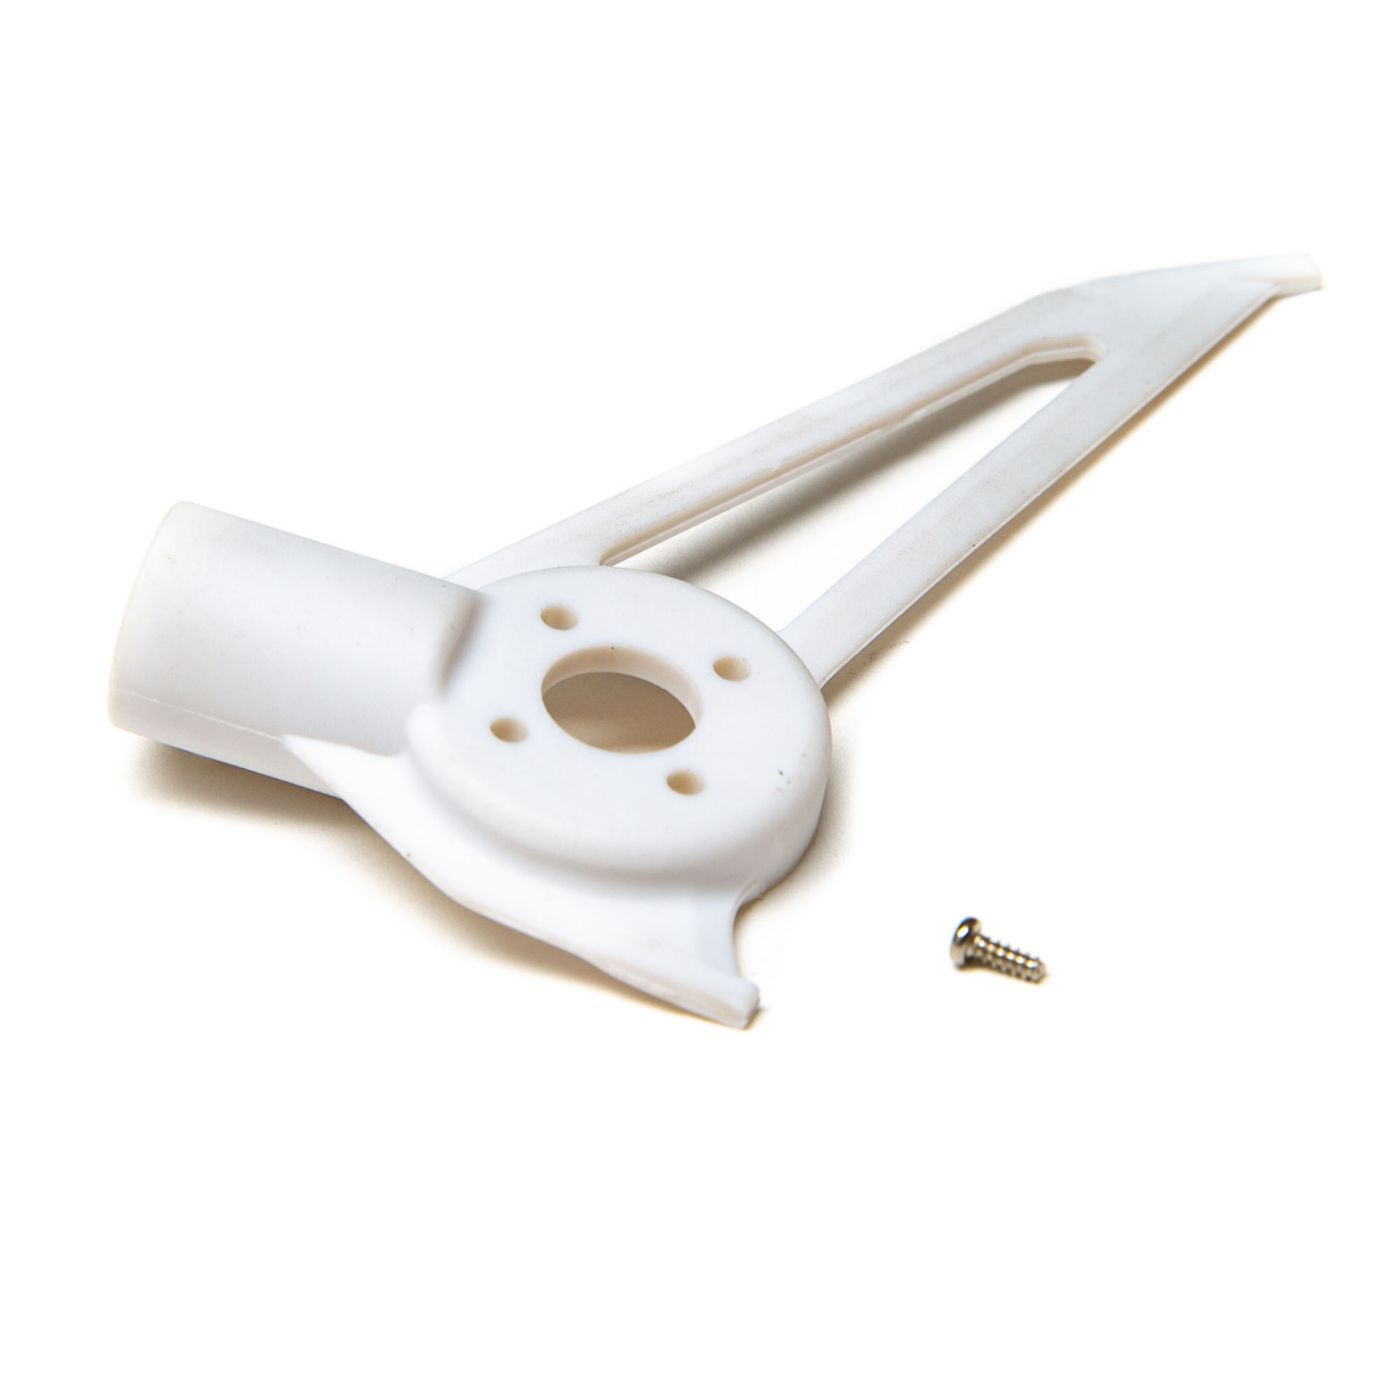 Blade Vertical Tail Fin/Motor Mount (White): 150 S BLH5404